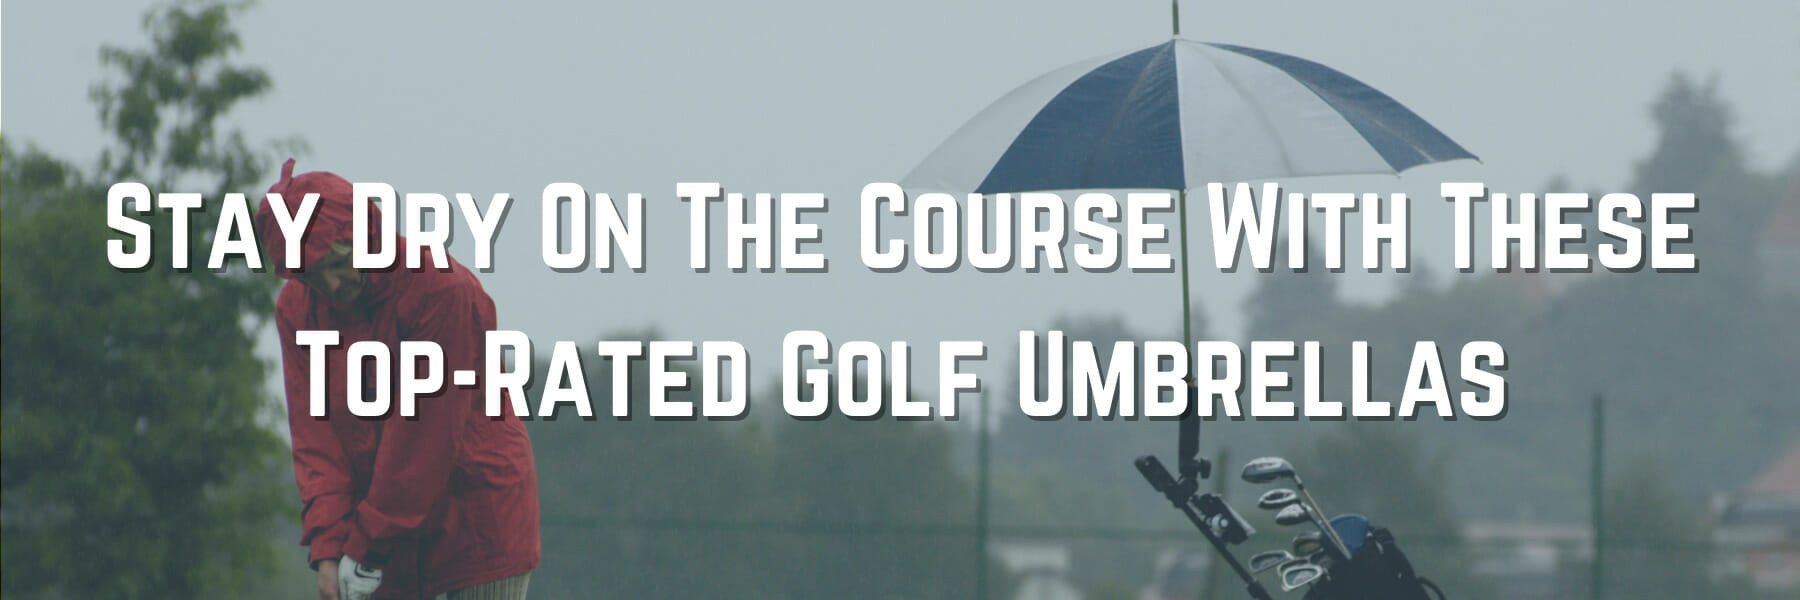 Best Rated Golf Umbrellas - Stay Dry On The Course